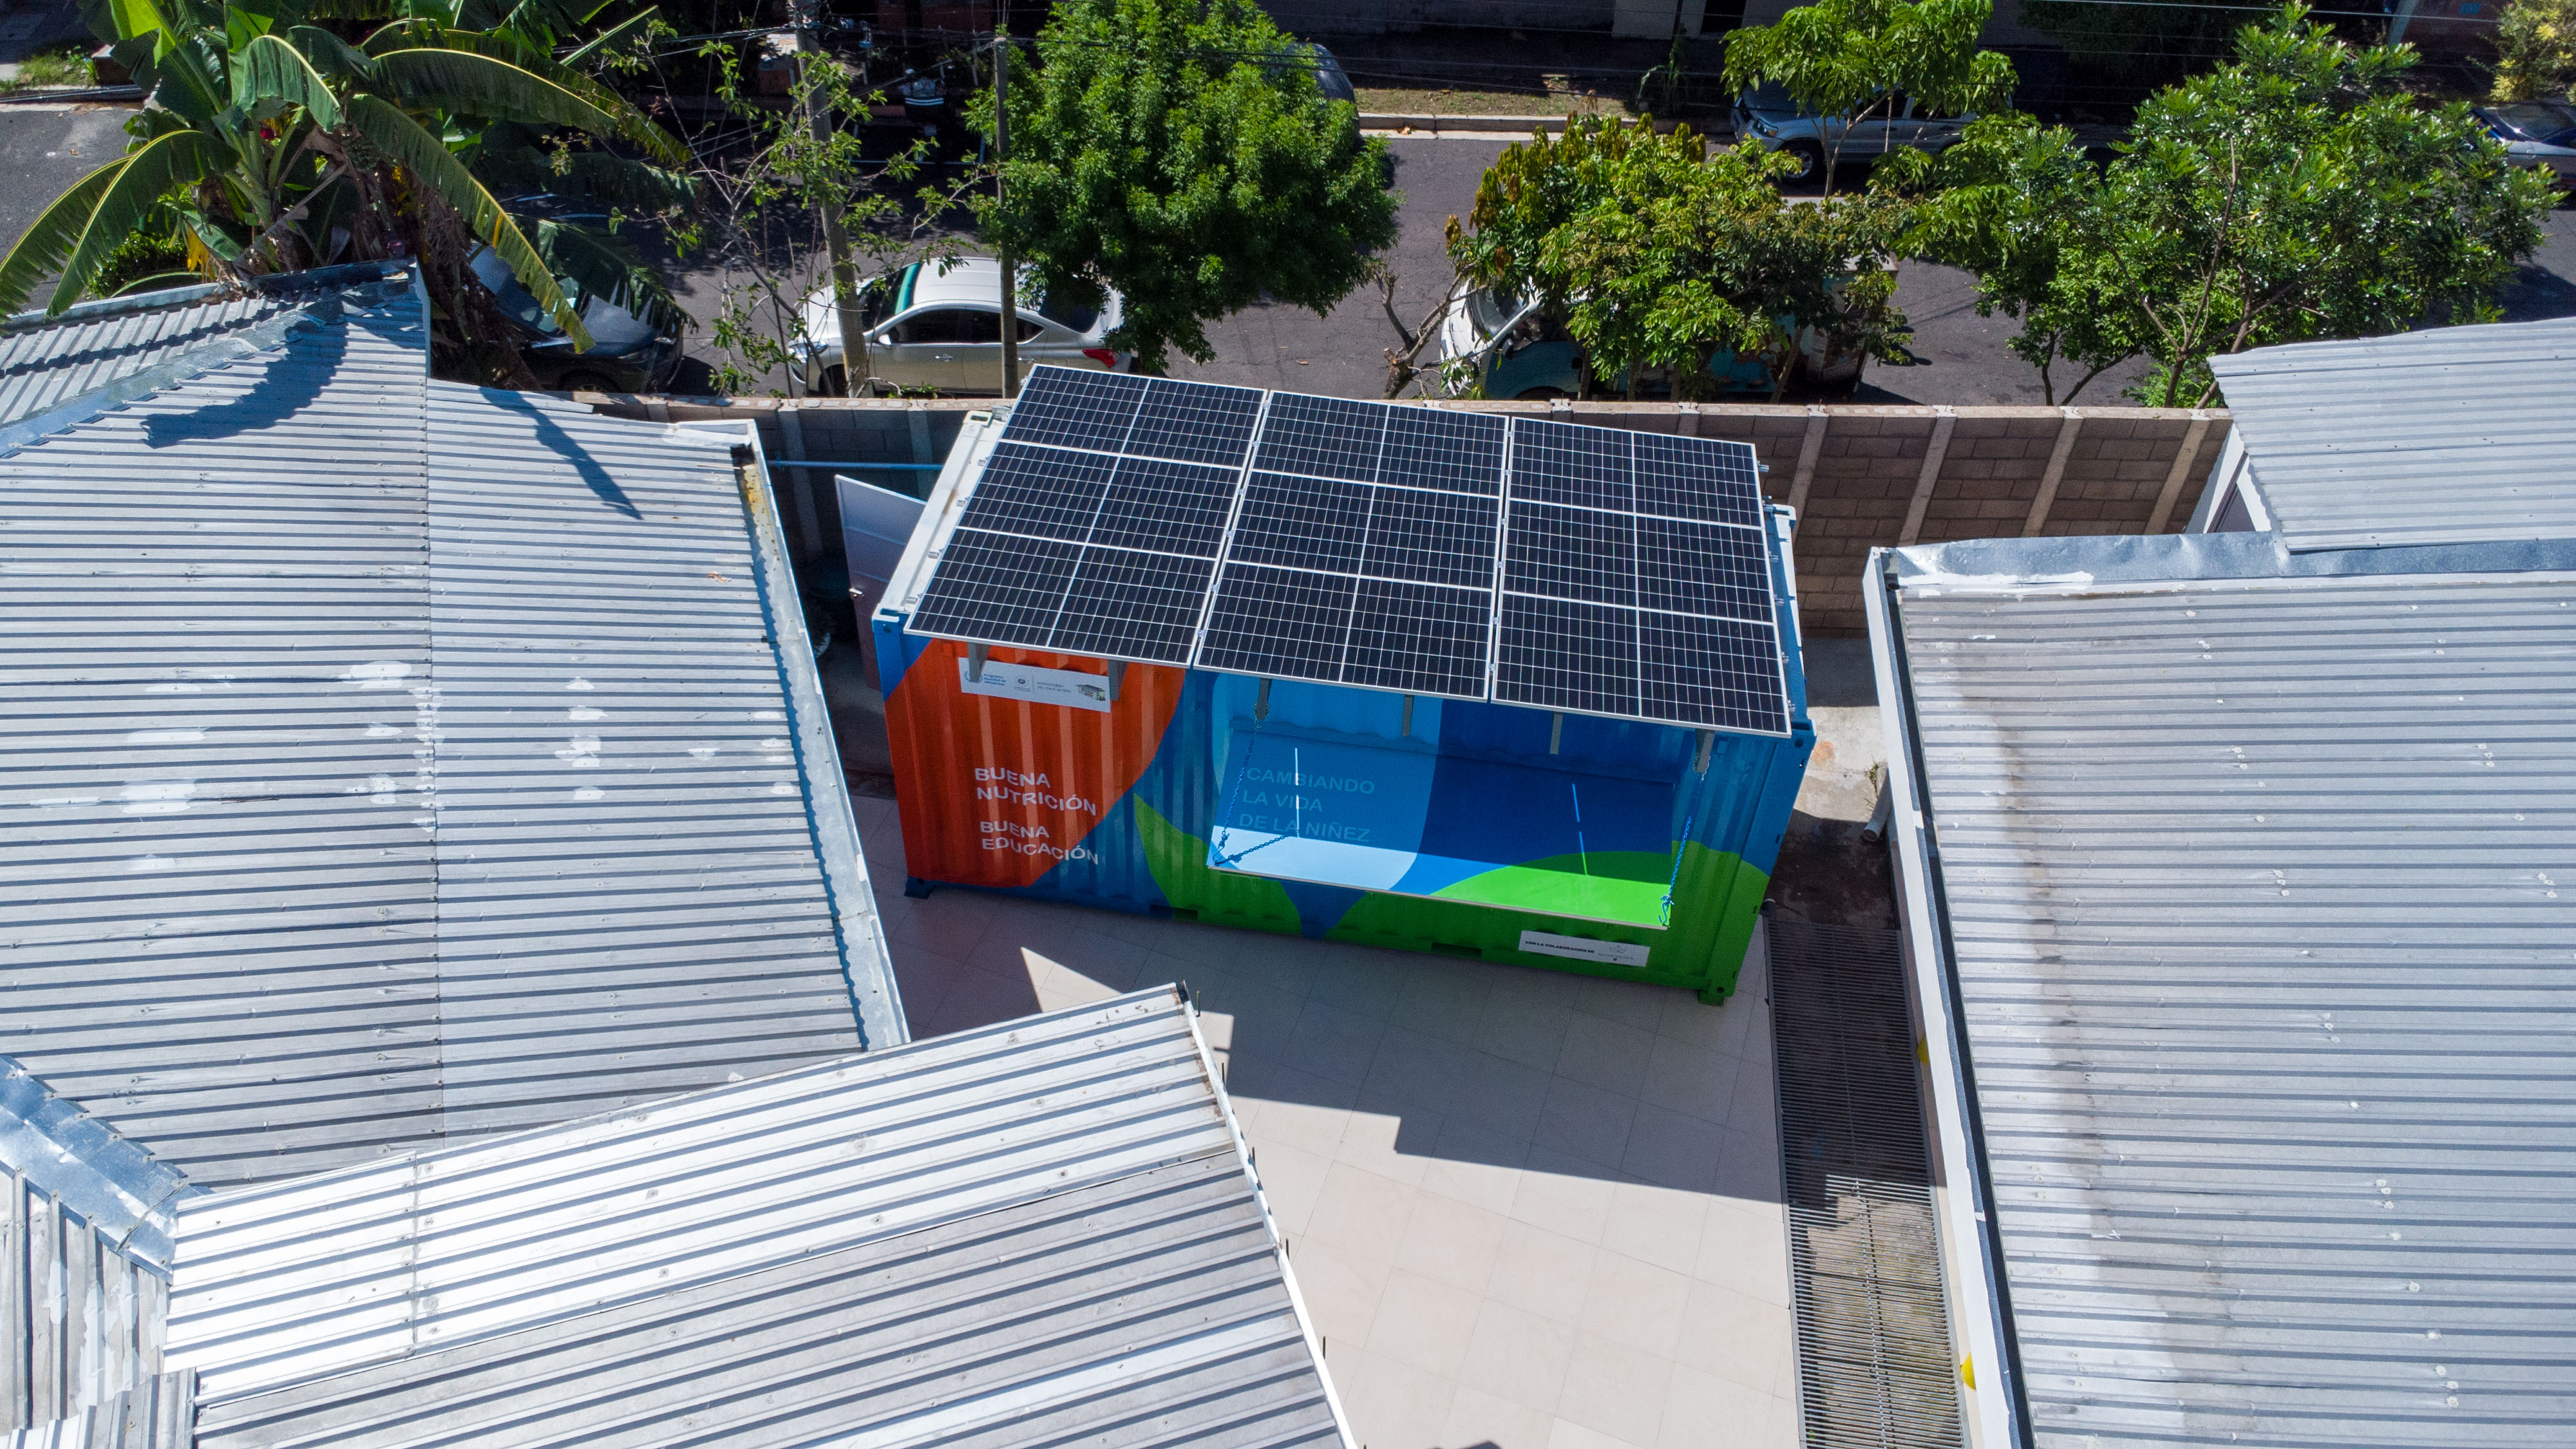 Solar panels placed on top of the Kitchen-In-a-Box facility